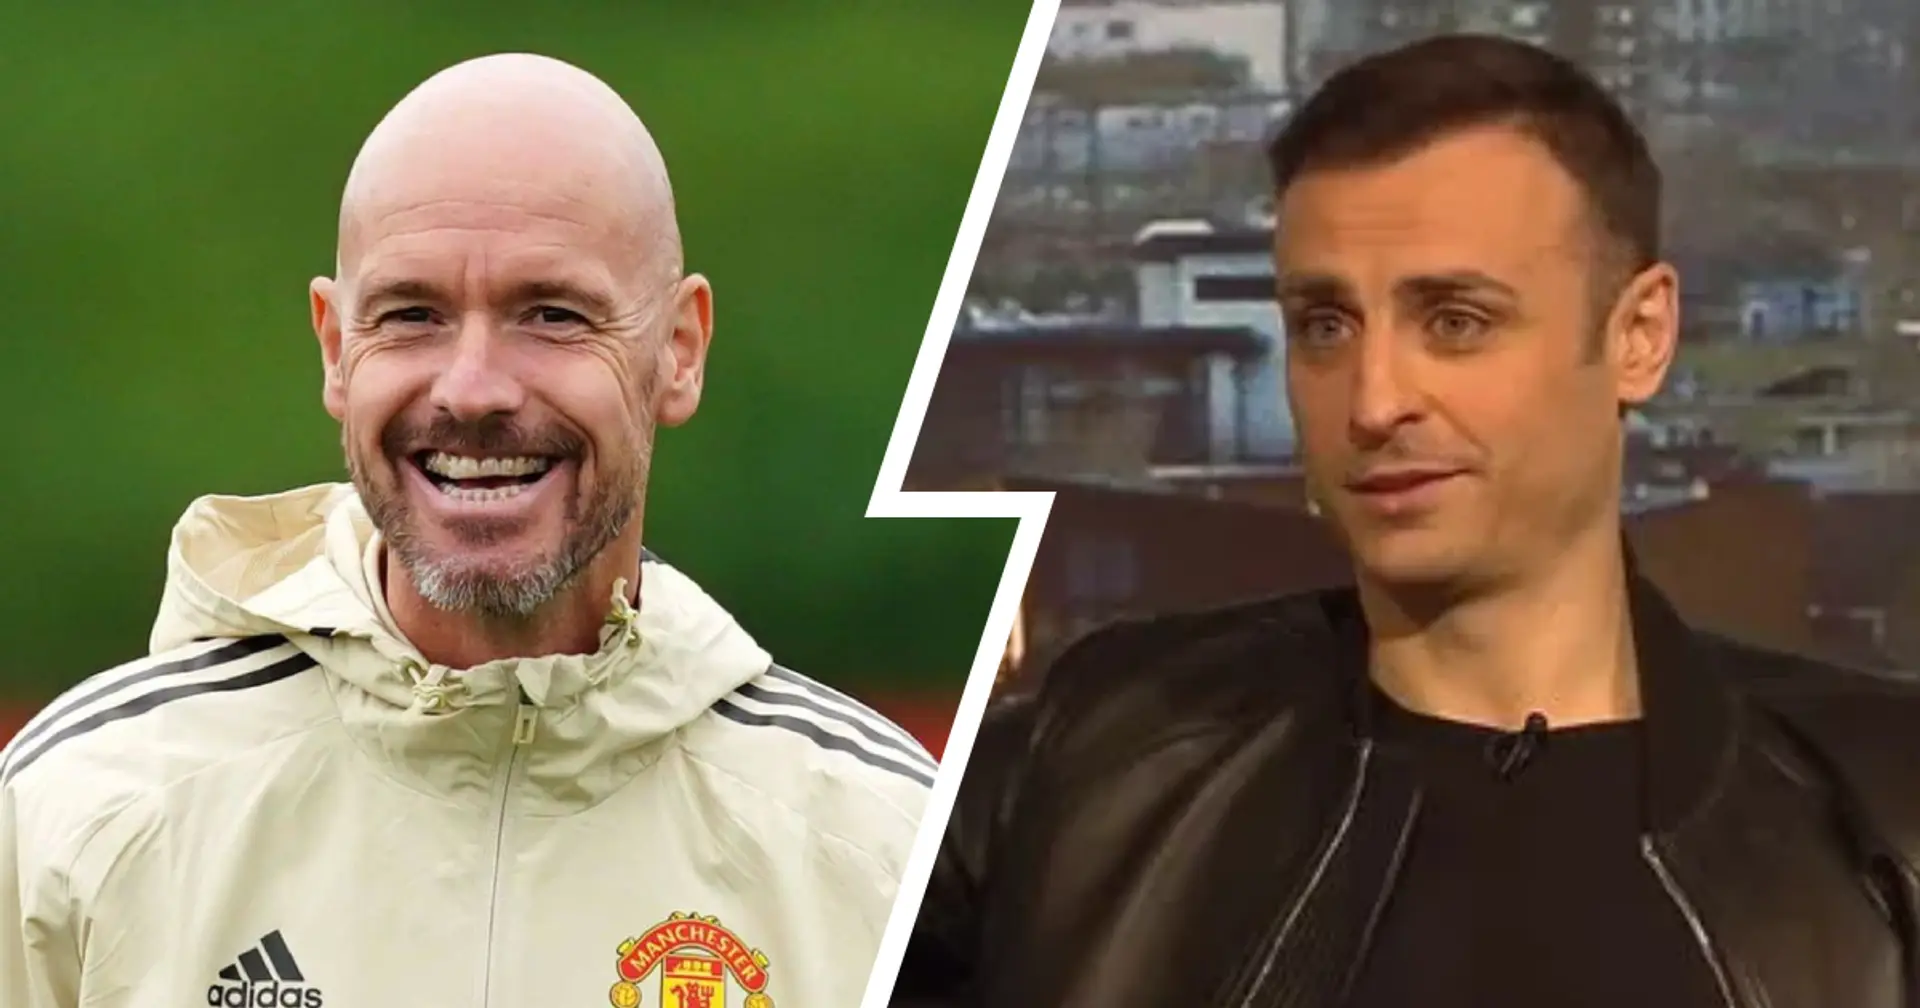 'Ten Hag is now fully knowledgeable': Dimitar Berbatov expects Man United to rival Man City next season